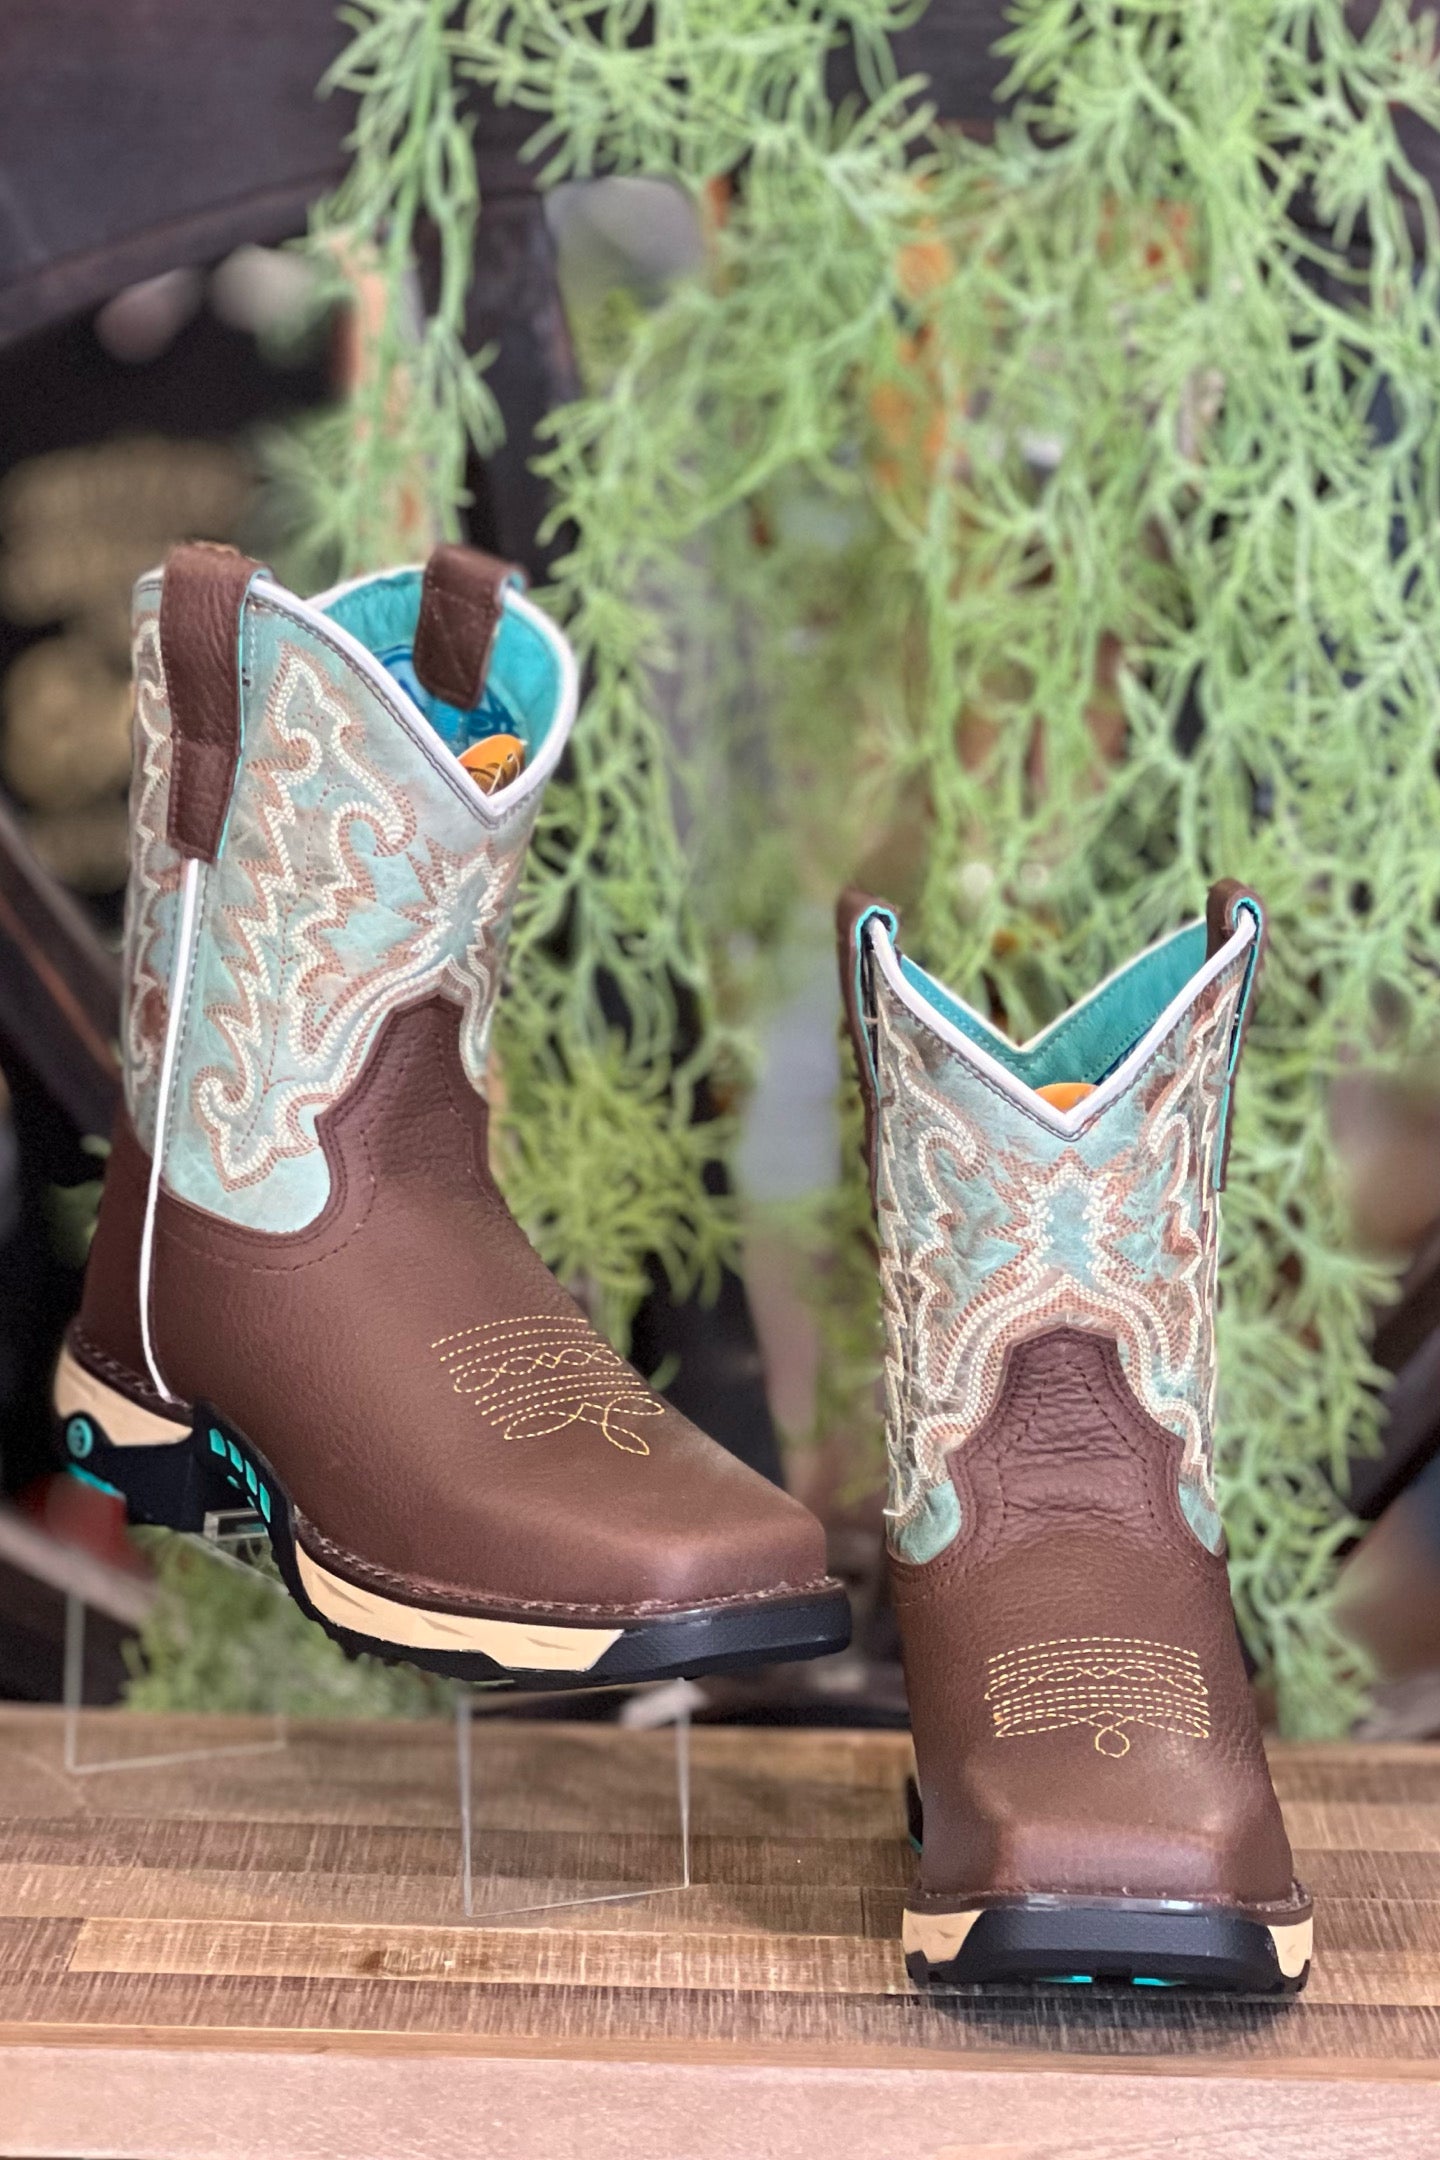 Corral Ladies Farm & Ranch Mint & Brown Square Toe Work Boots-Ladies Boot-Corral Boots/Circle G by Corral Boots-Gallop 'n Glitz- Women's Western Wear Boutique, Located in Grants Pass, Oregon